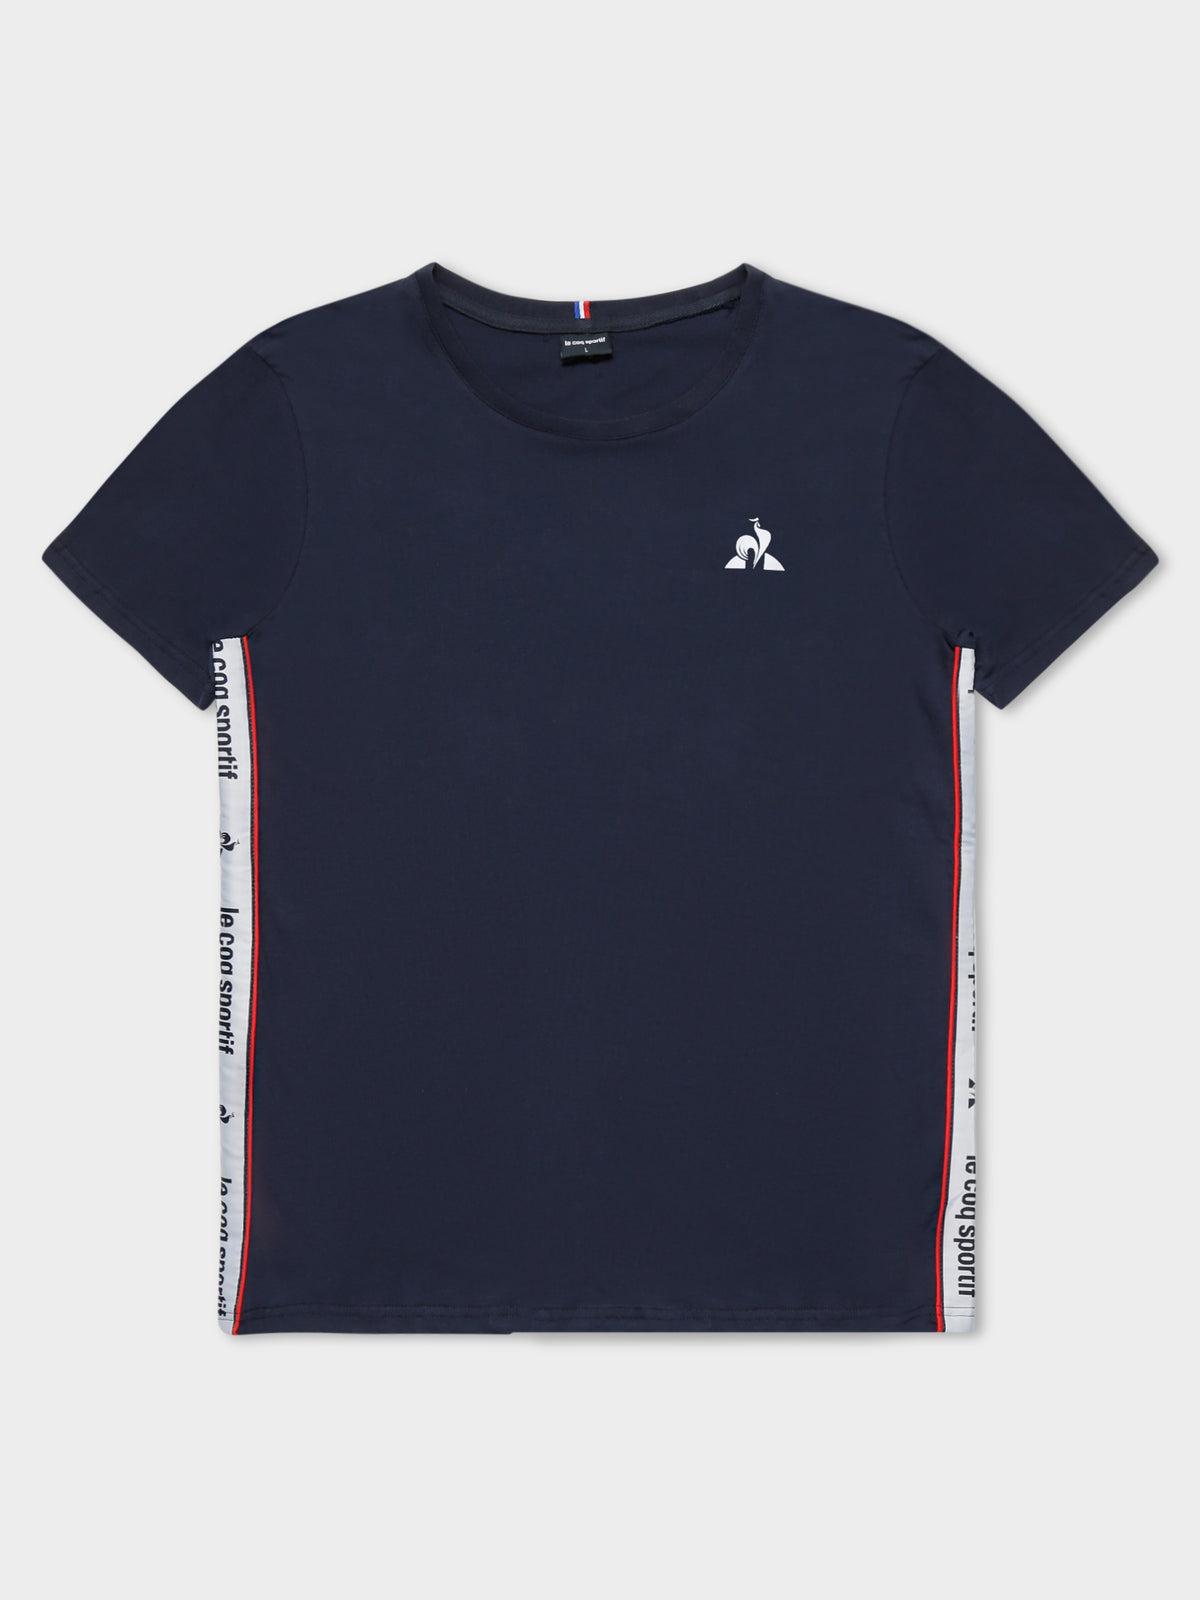 Royale T-Shirt in Dress Blue